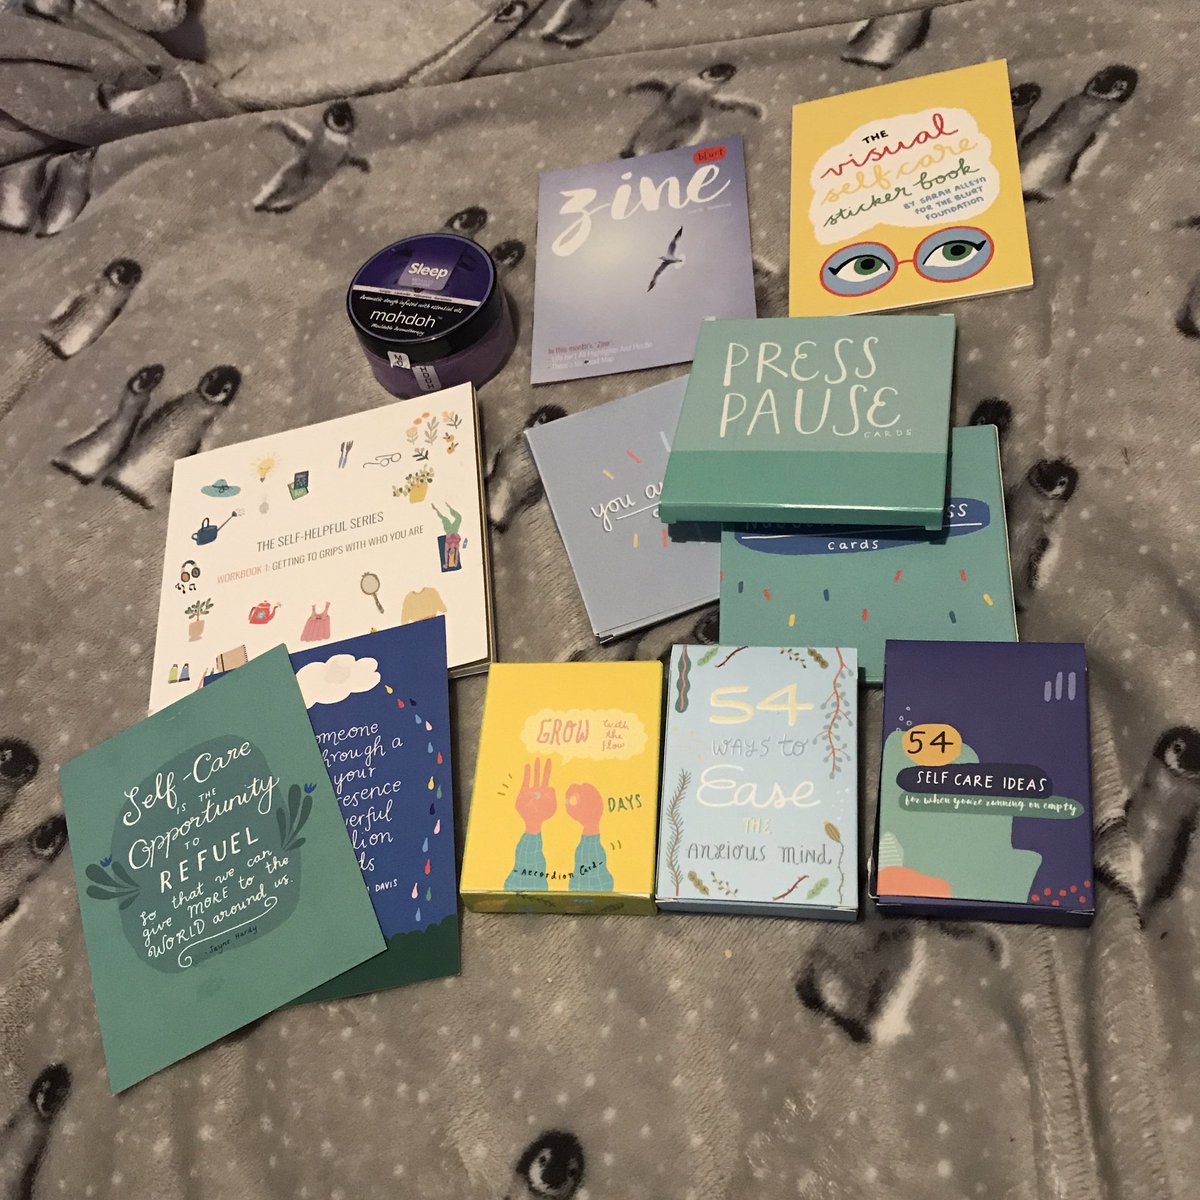 Not strictly speaking a ‘small biz’ but a very worthwhile cause,  @BlurtAlerts are an organisation I’ve followed and adored for ages now. They do amazing work & their shop stocks brilliant (and helpful) goodies and books by their CEO  @JayneHardy_  http://www.blurtitout.org 